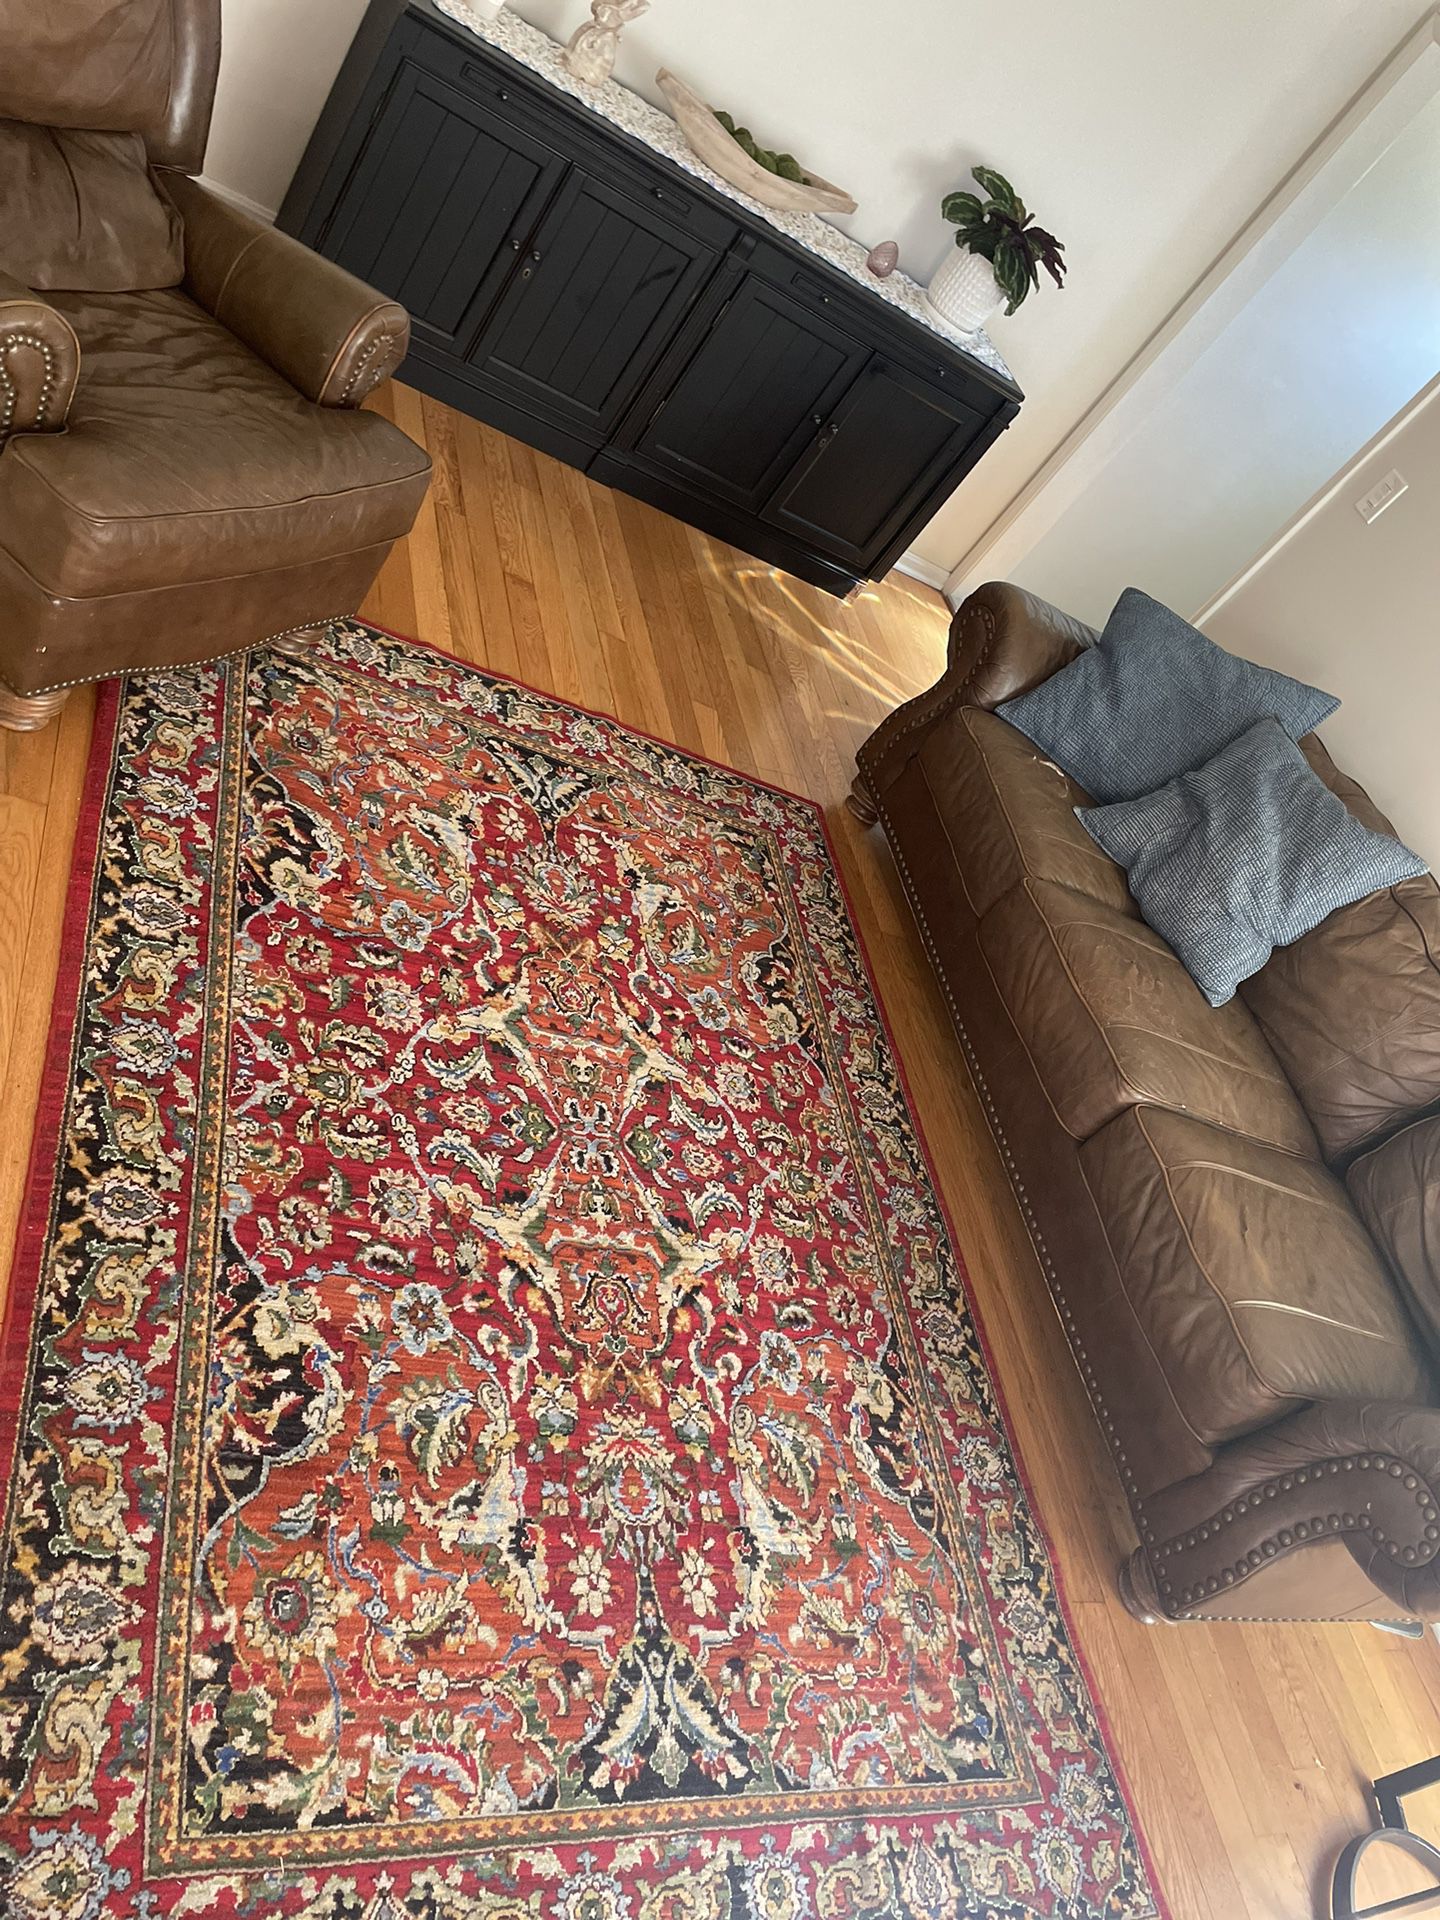 1 Couch 1 Recliner Rug Ottoman